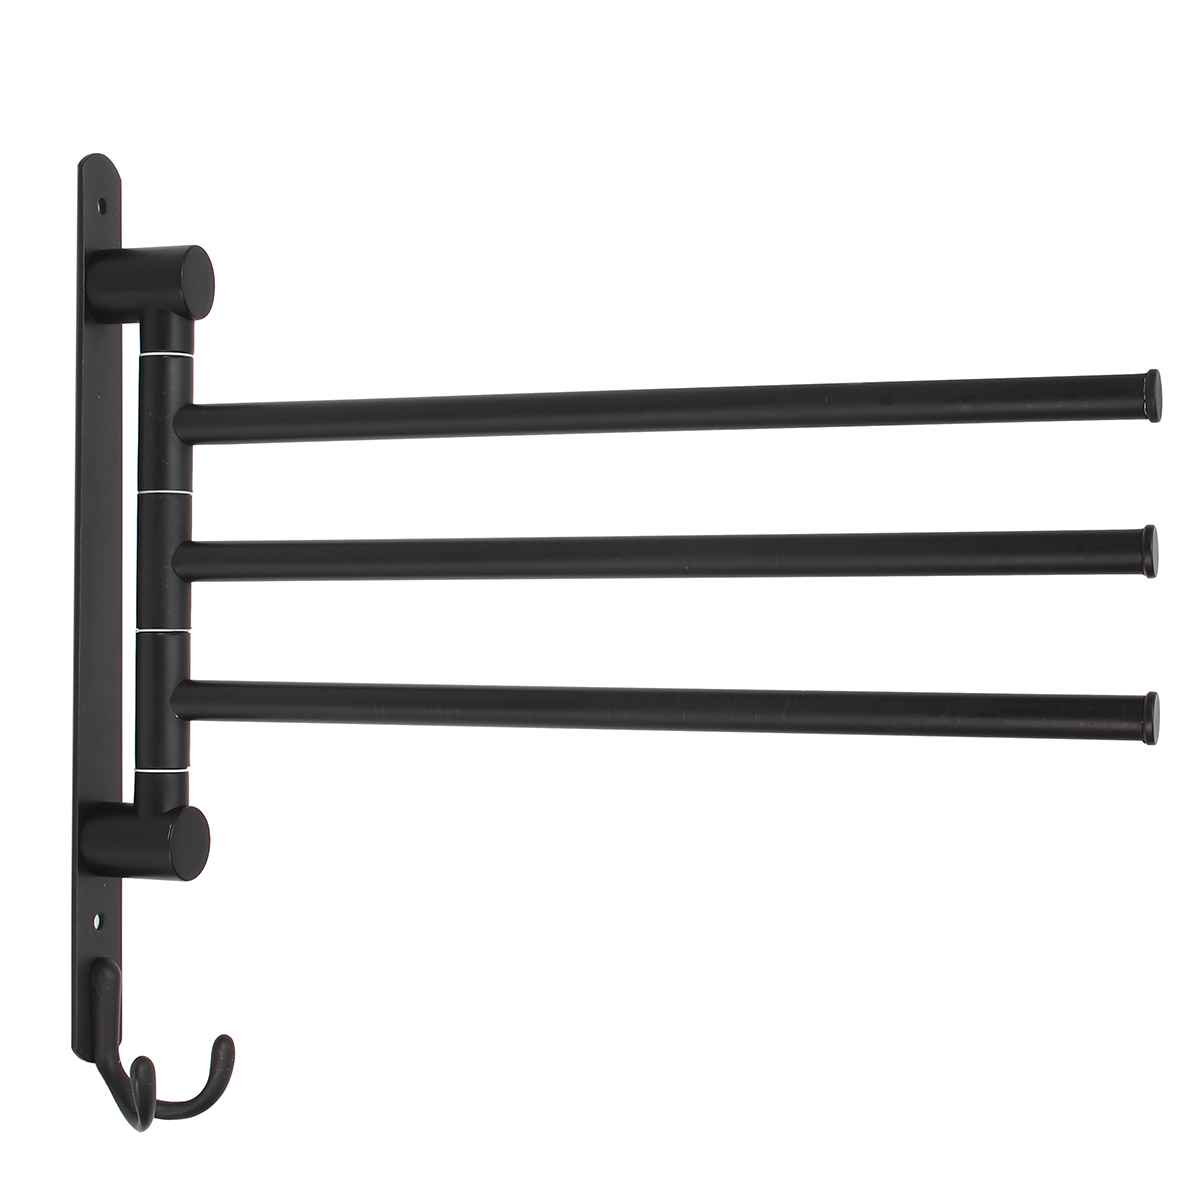 

Black Swing Out Towel Bar 3-Bar Alloy Swivel Wall Mounted Hanger with Hooks